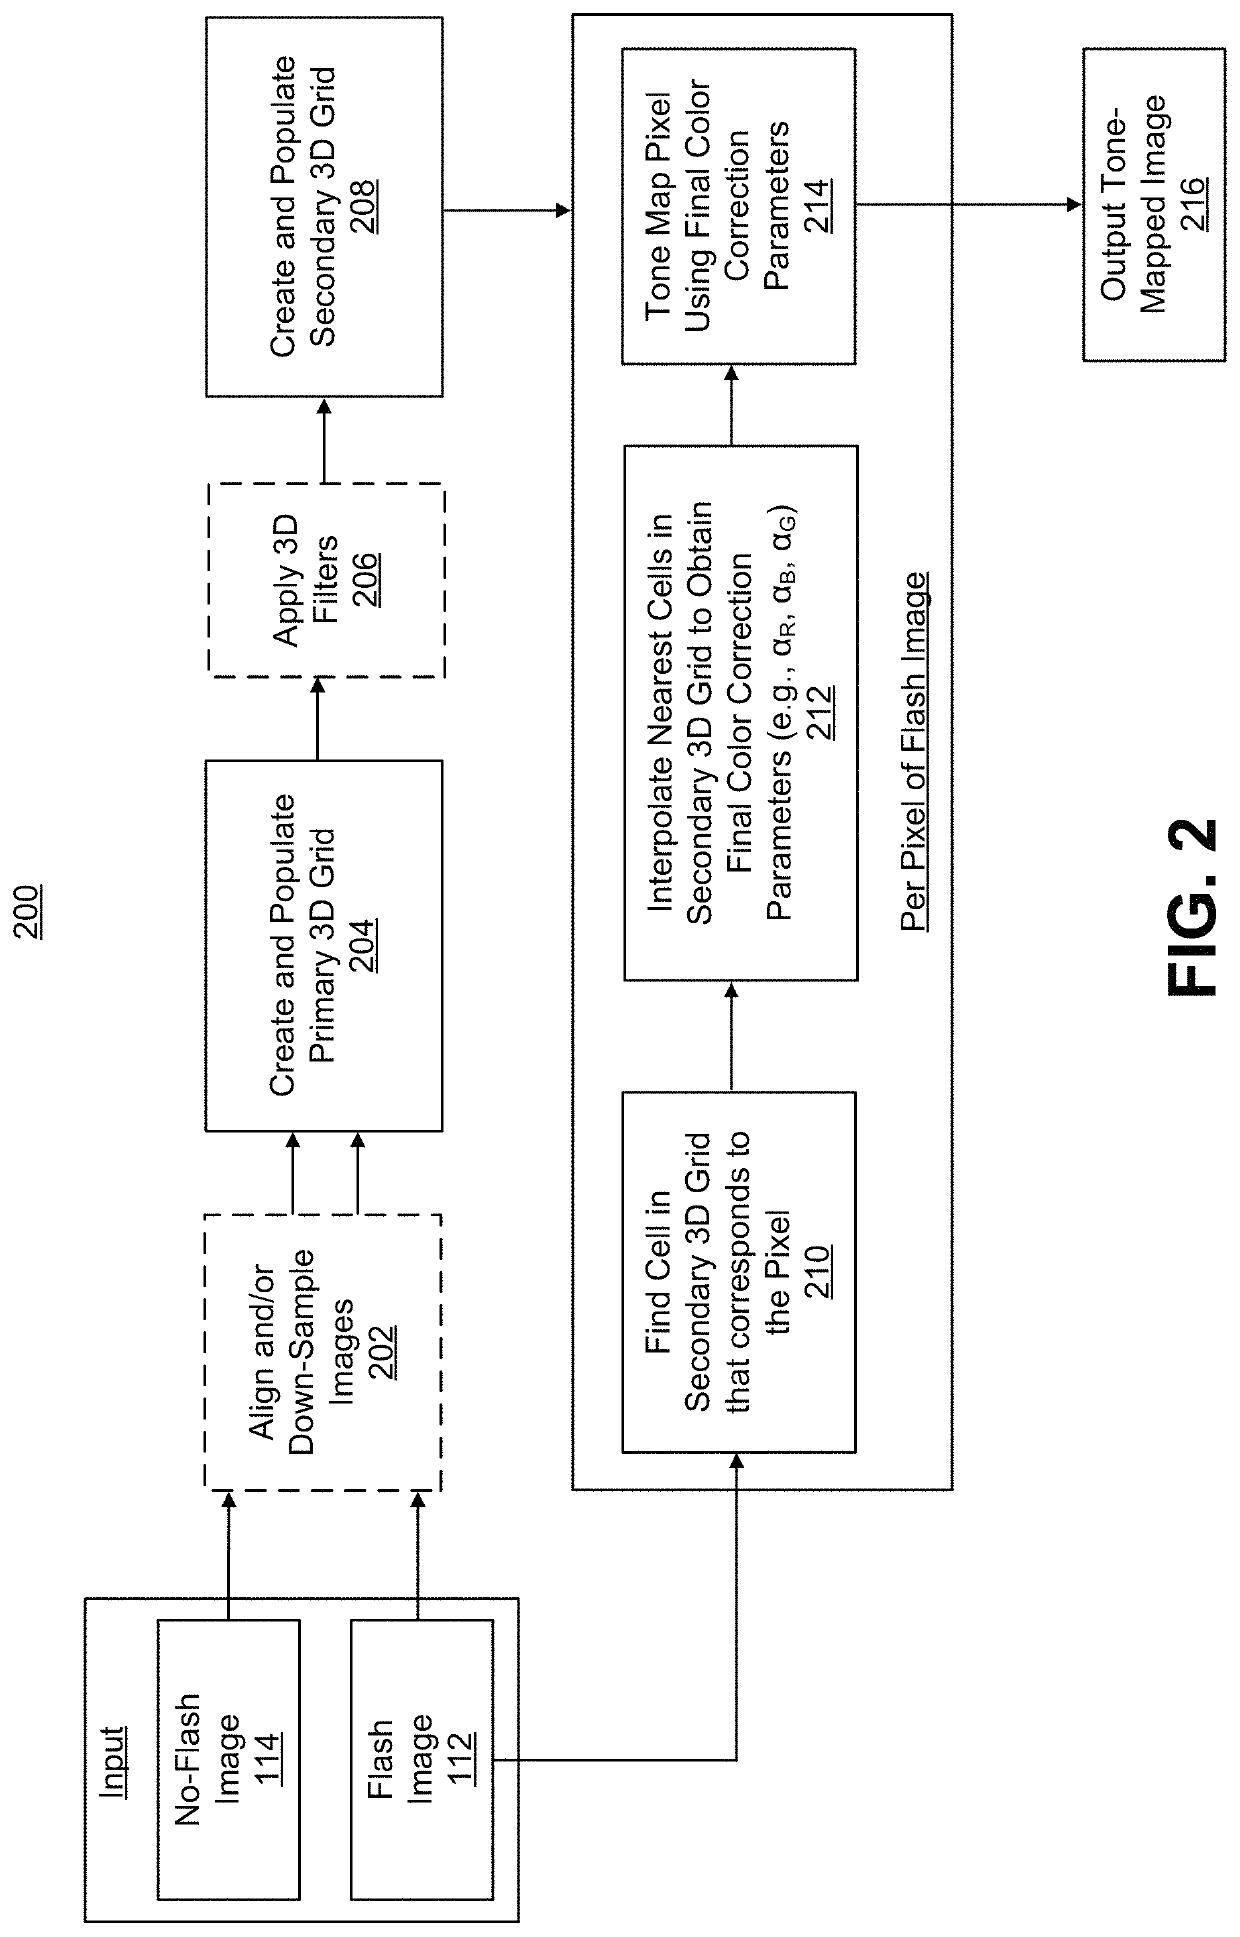 Systems and methods for color matching for realistic flash images